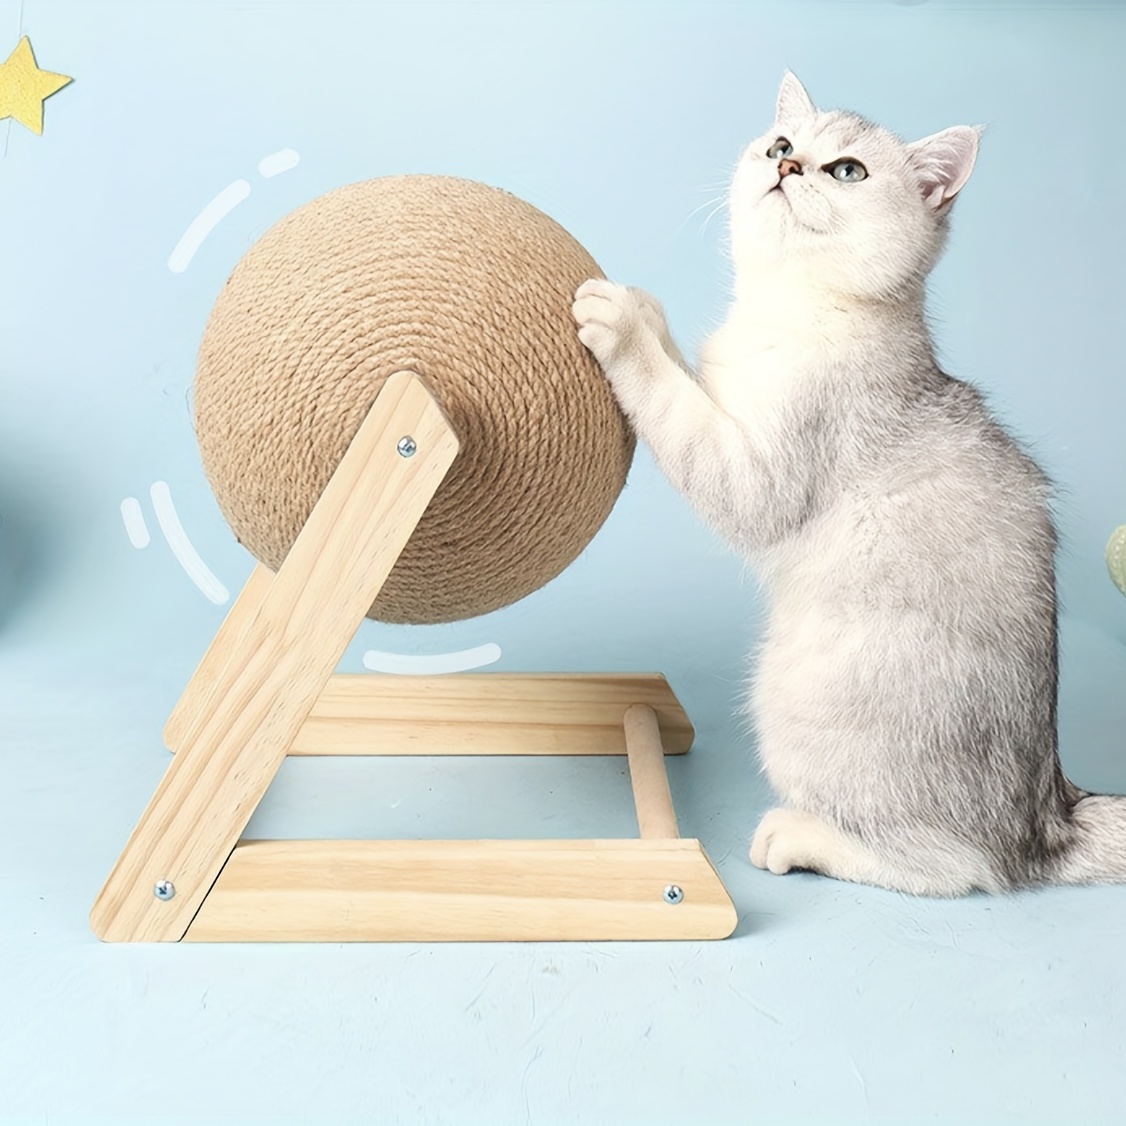 Cat Scratching Ball Toy Deals on Our Store - Free Shipping & Returns